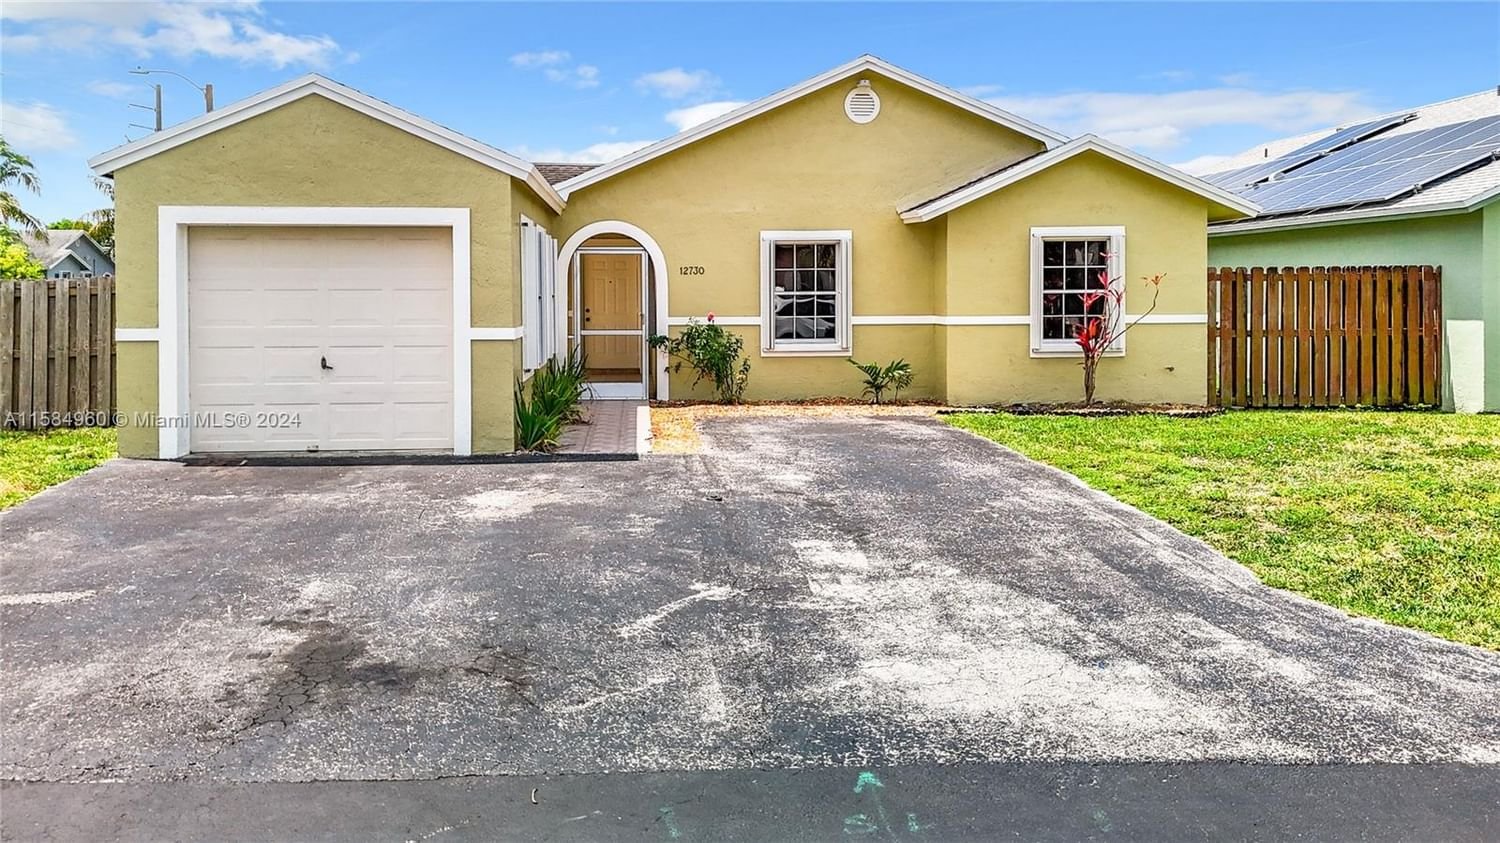 Real estate property located at 12730 248th Ter, Miami-Dade County, PRINCETONIAN BY THE PARK, Homestead, FL